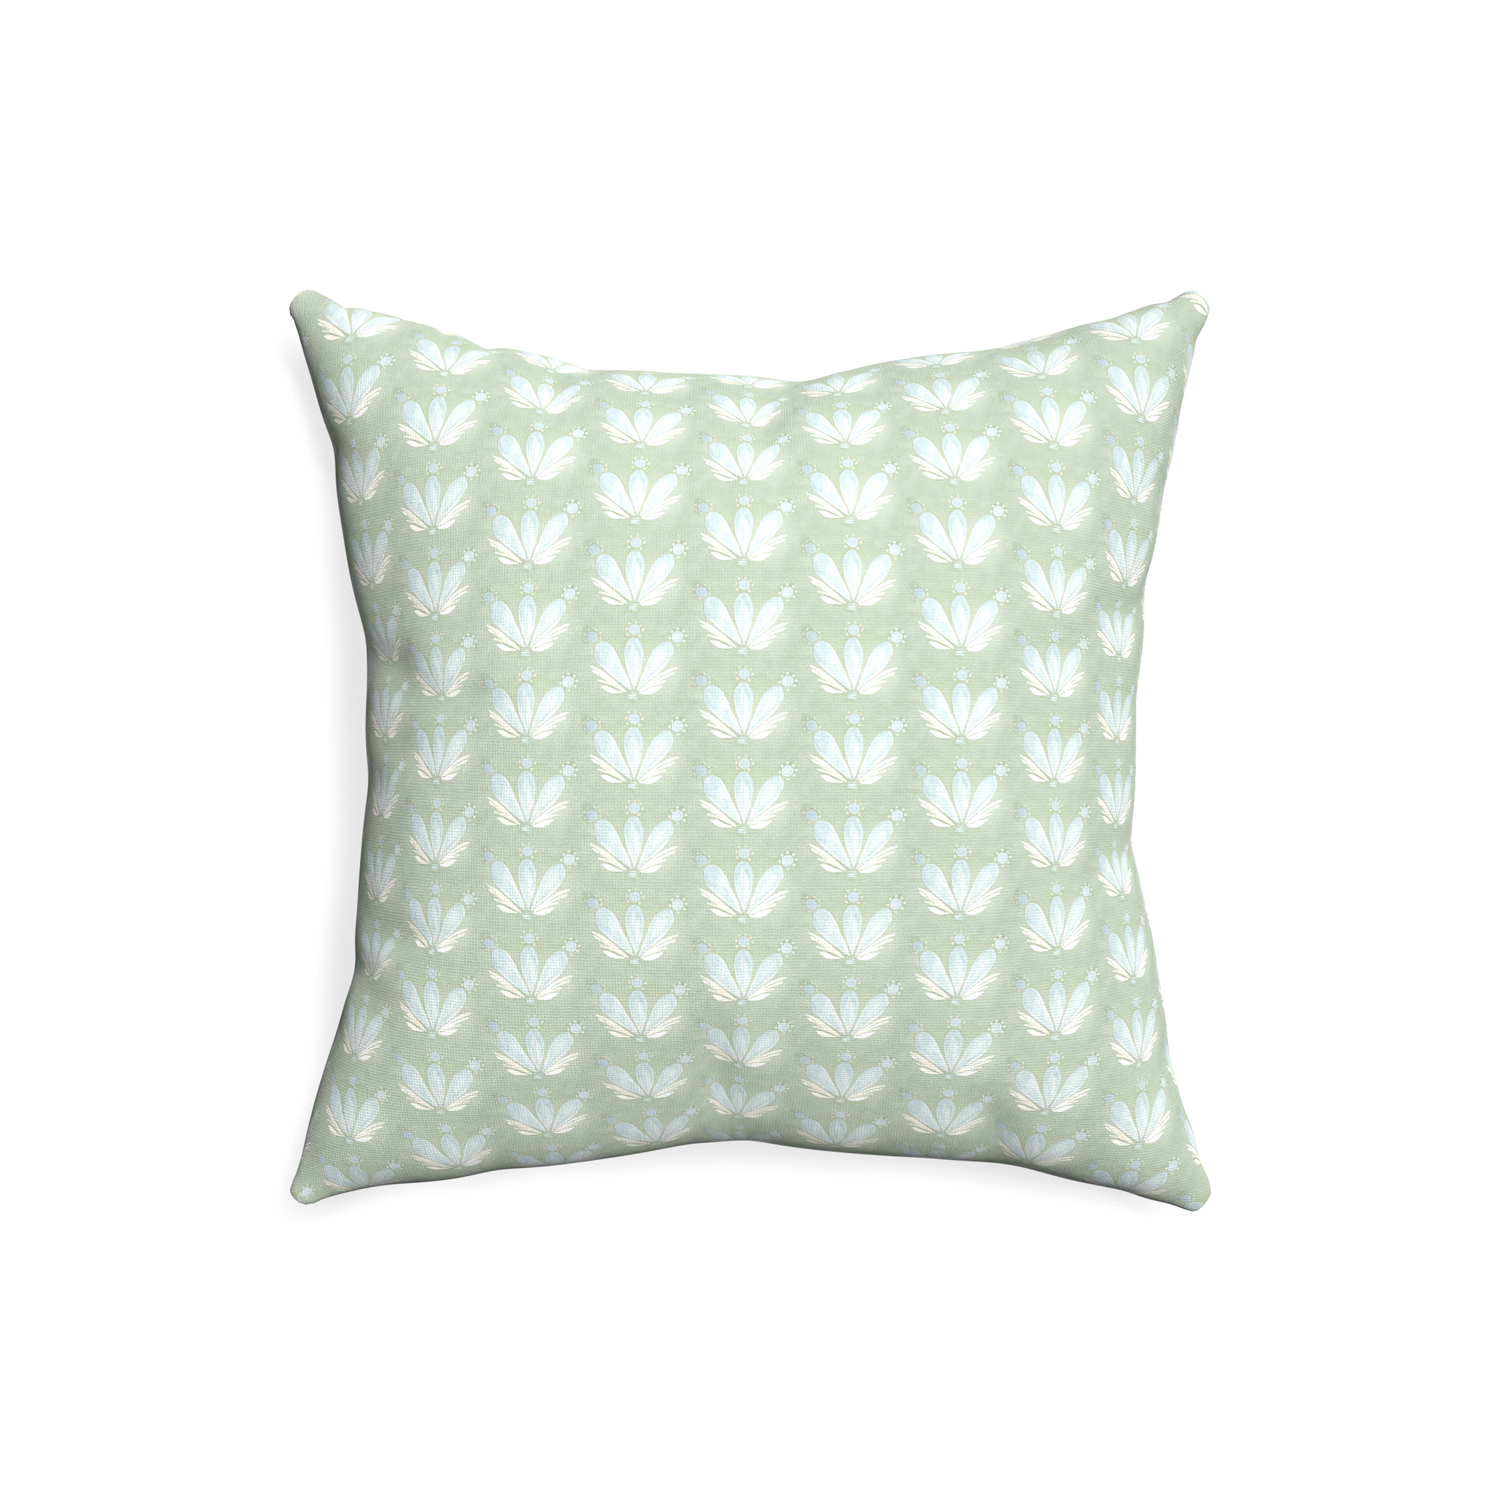 20-square serena sea salt custom blue & green floral drop repeatpillow with none on white background